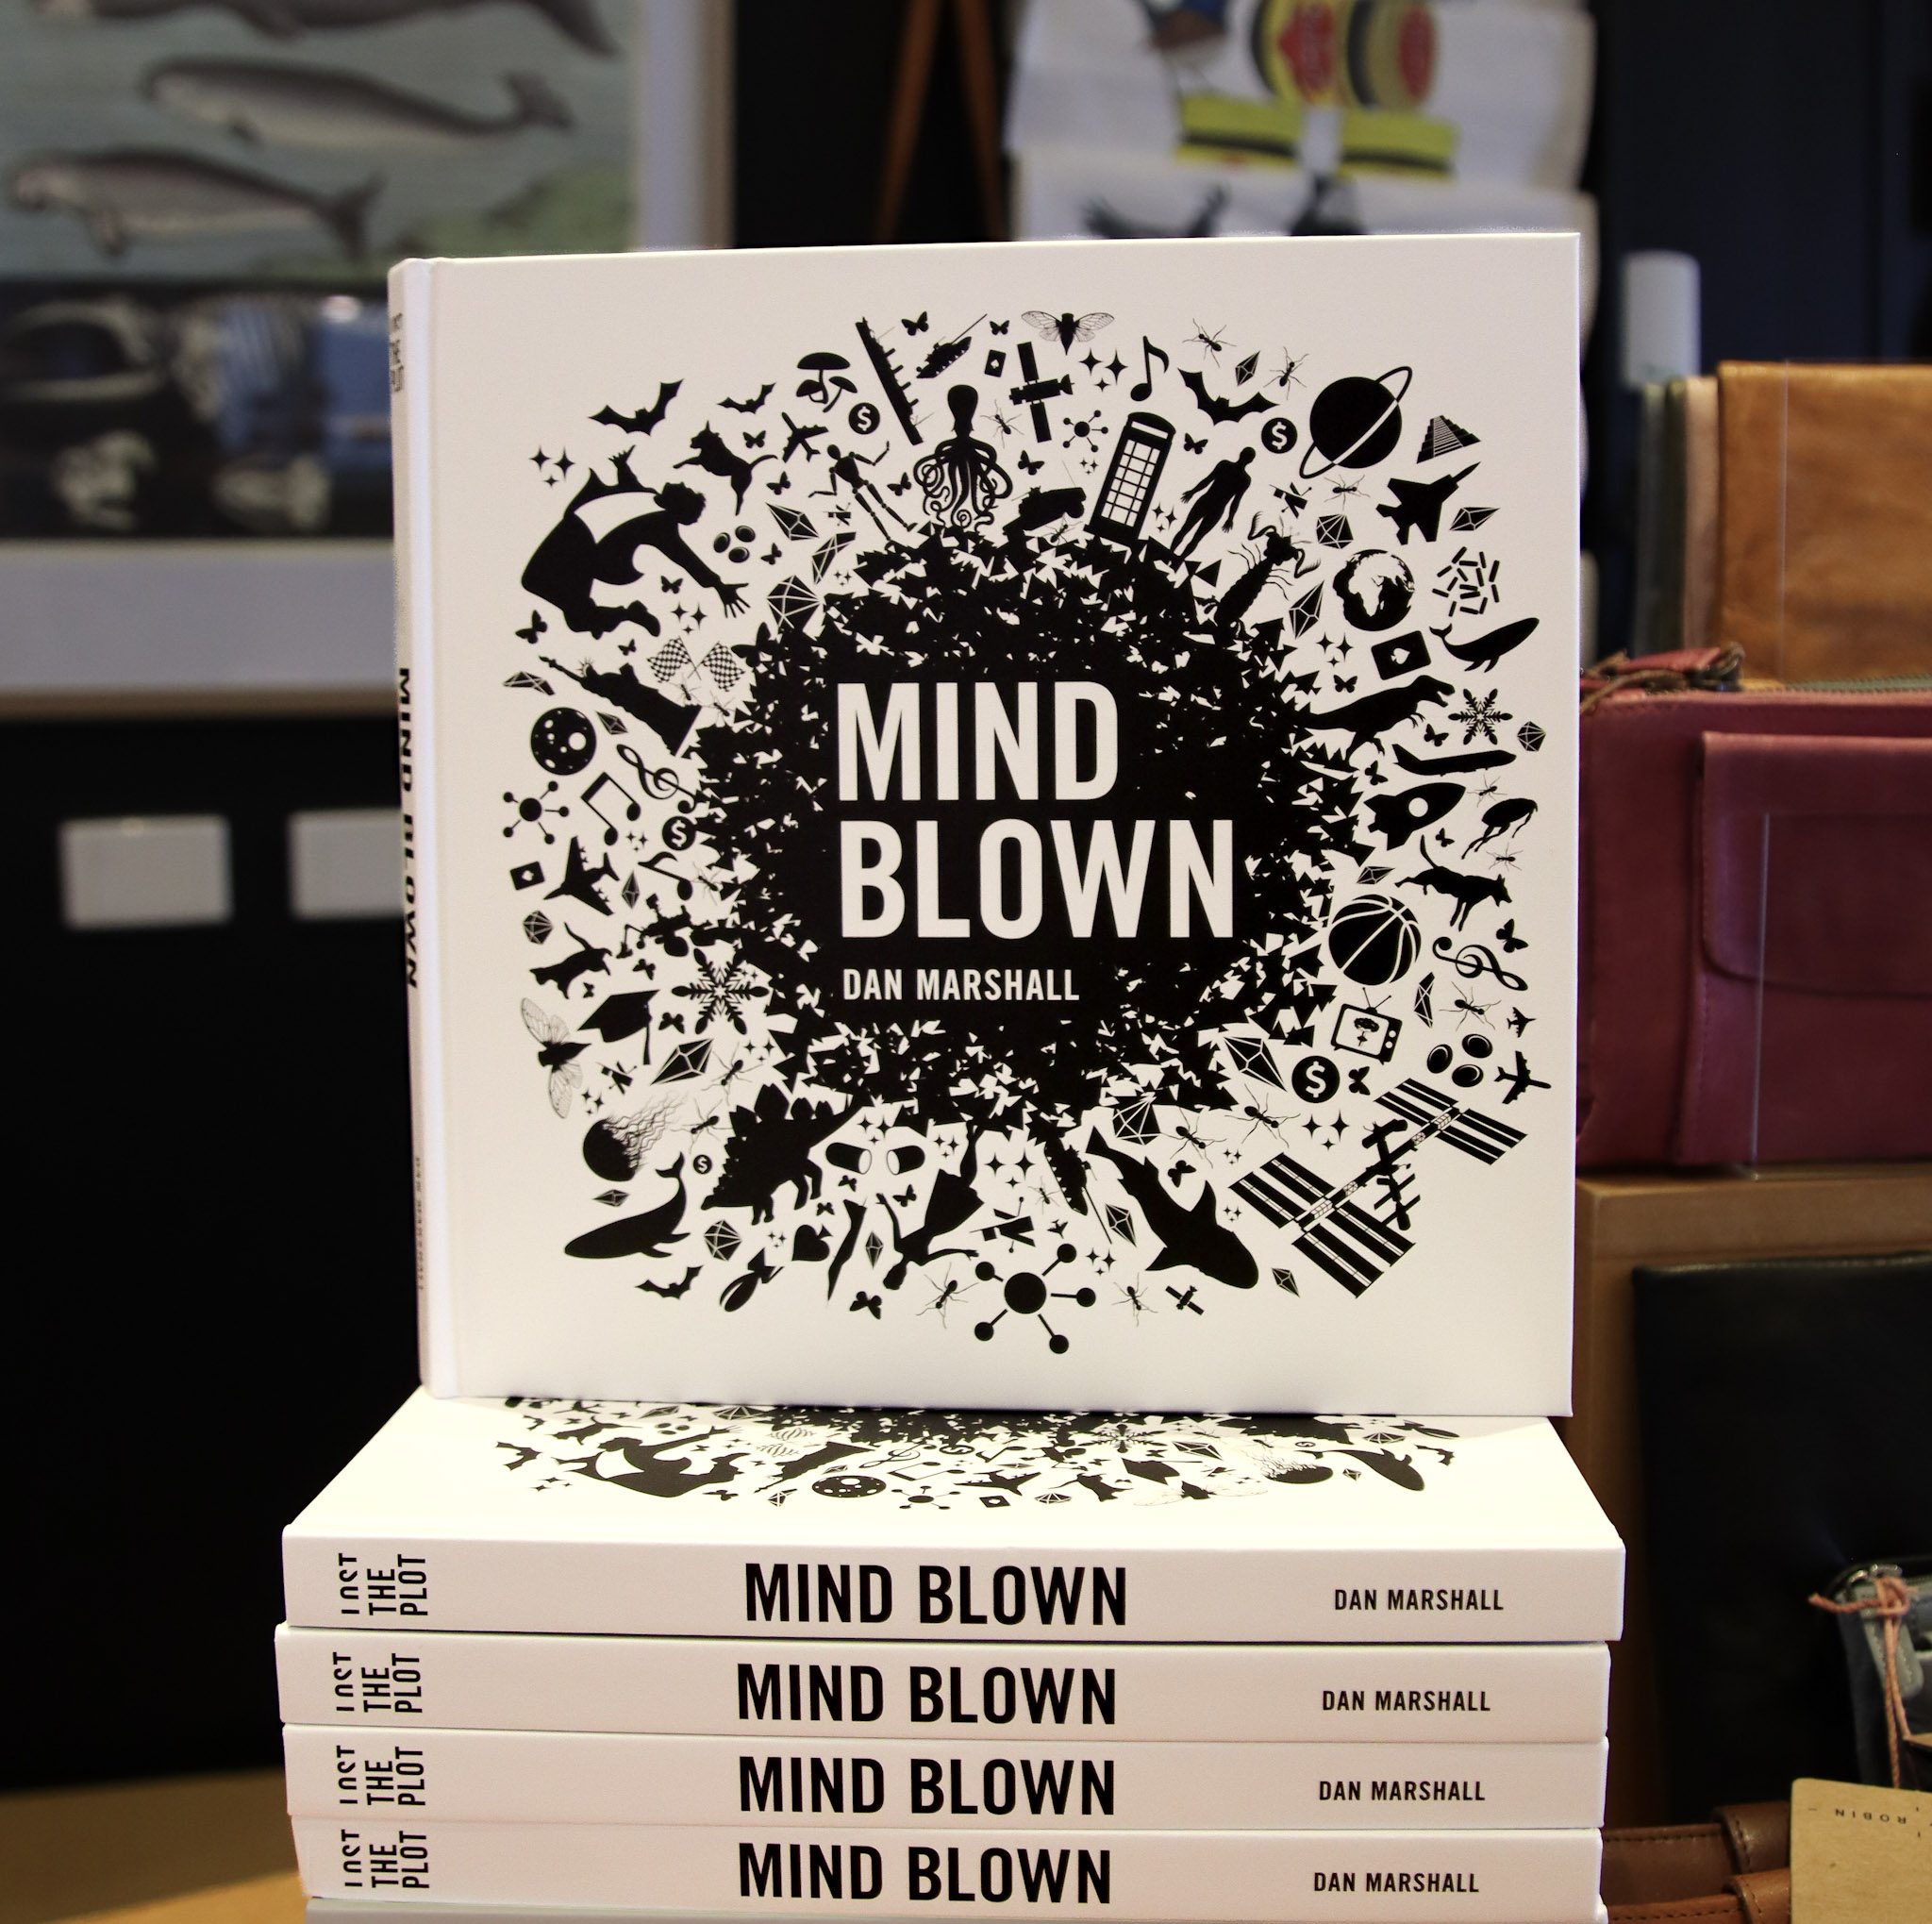 The Mind Blown book by Dan Marshall